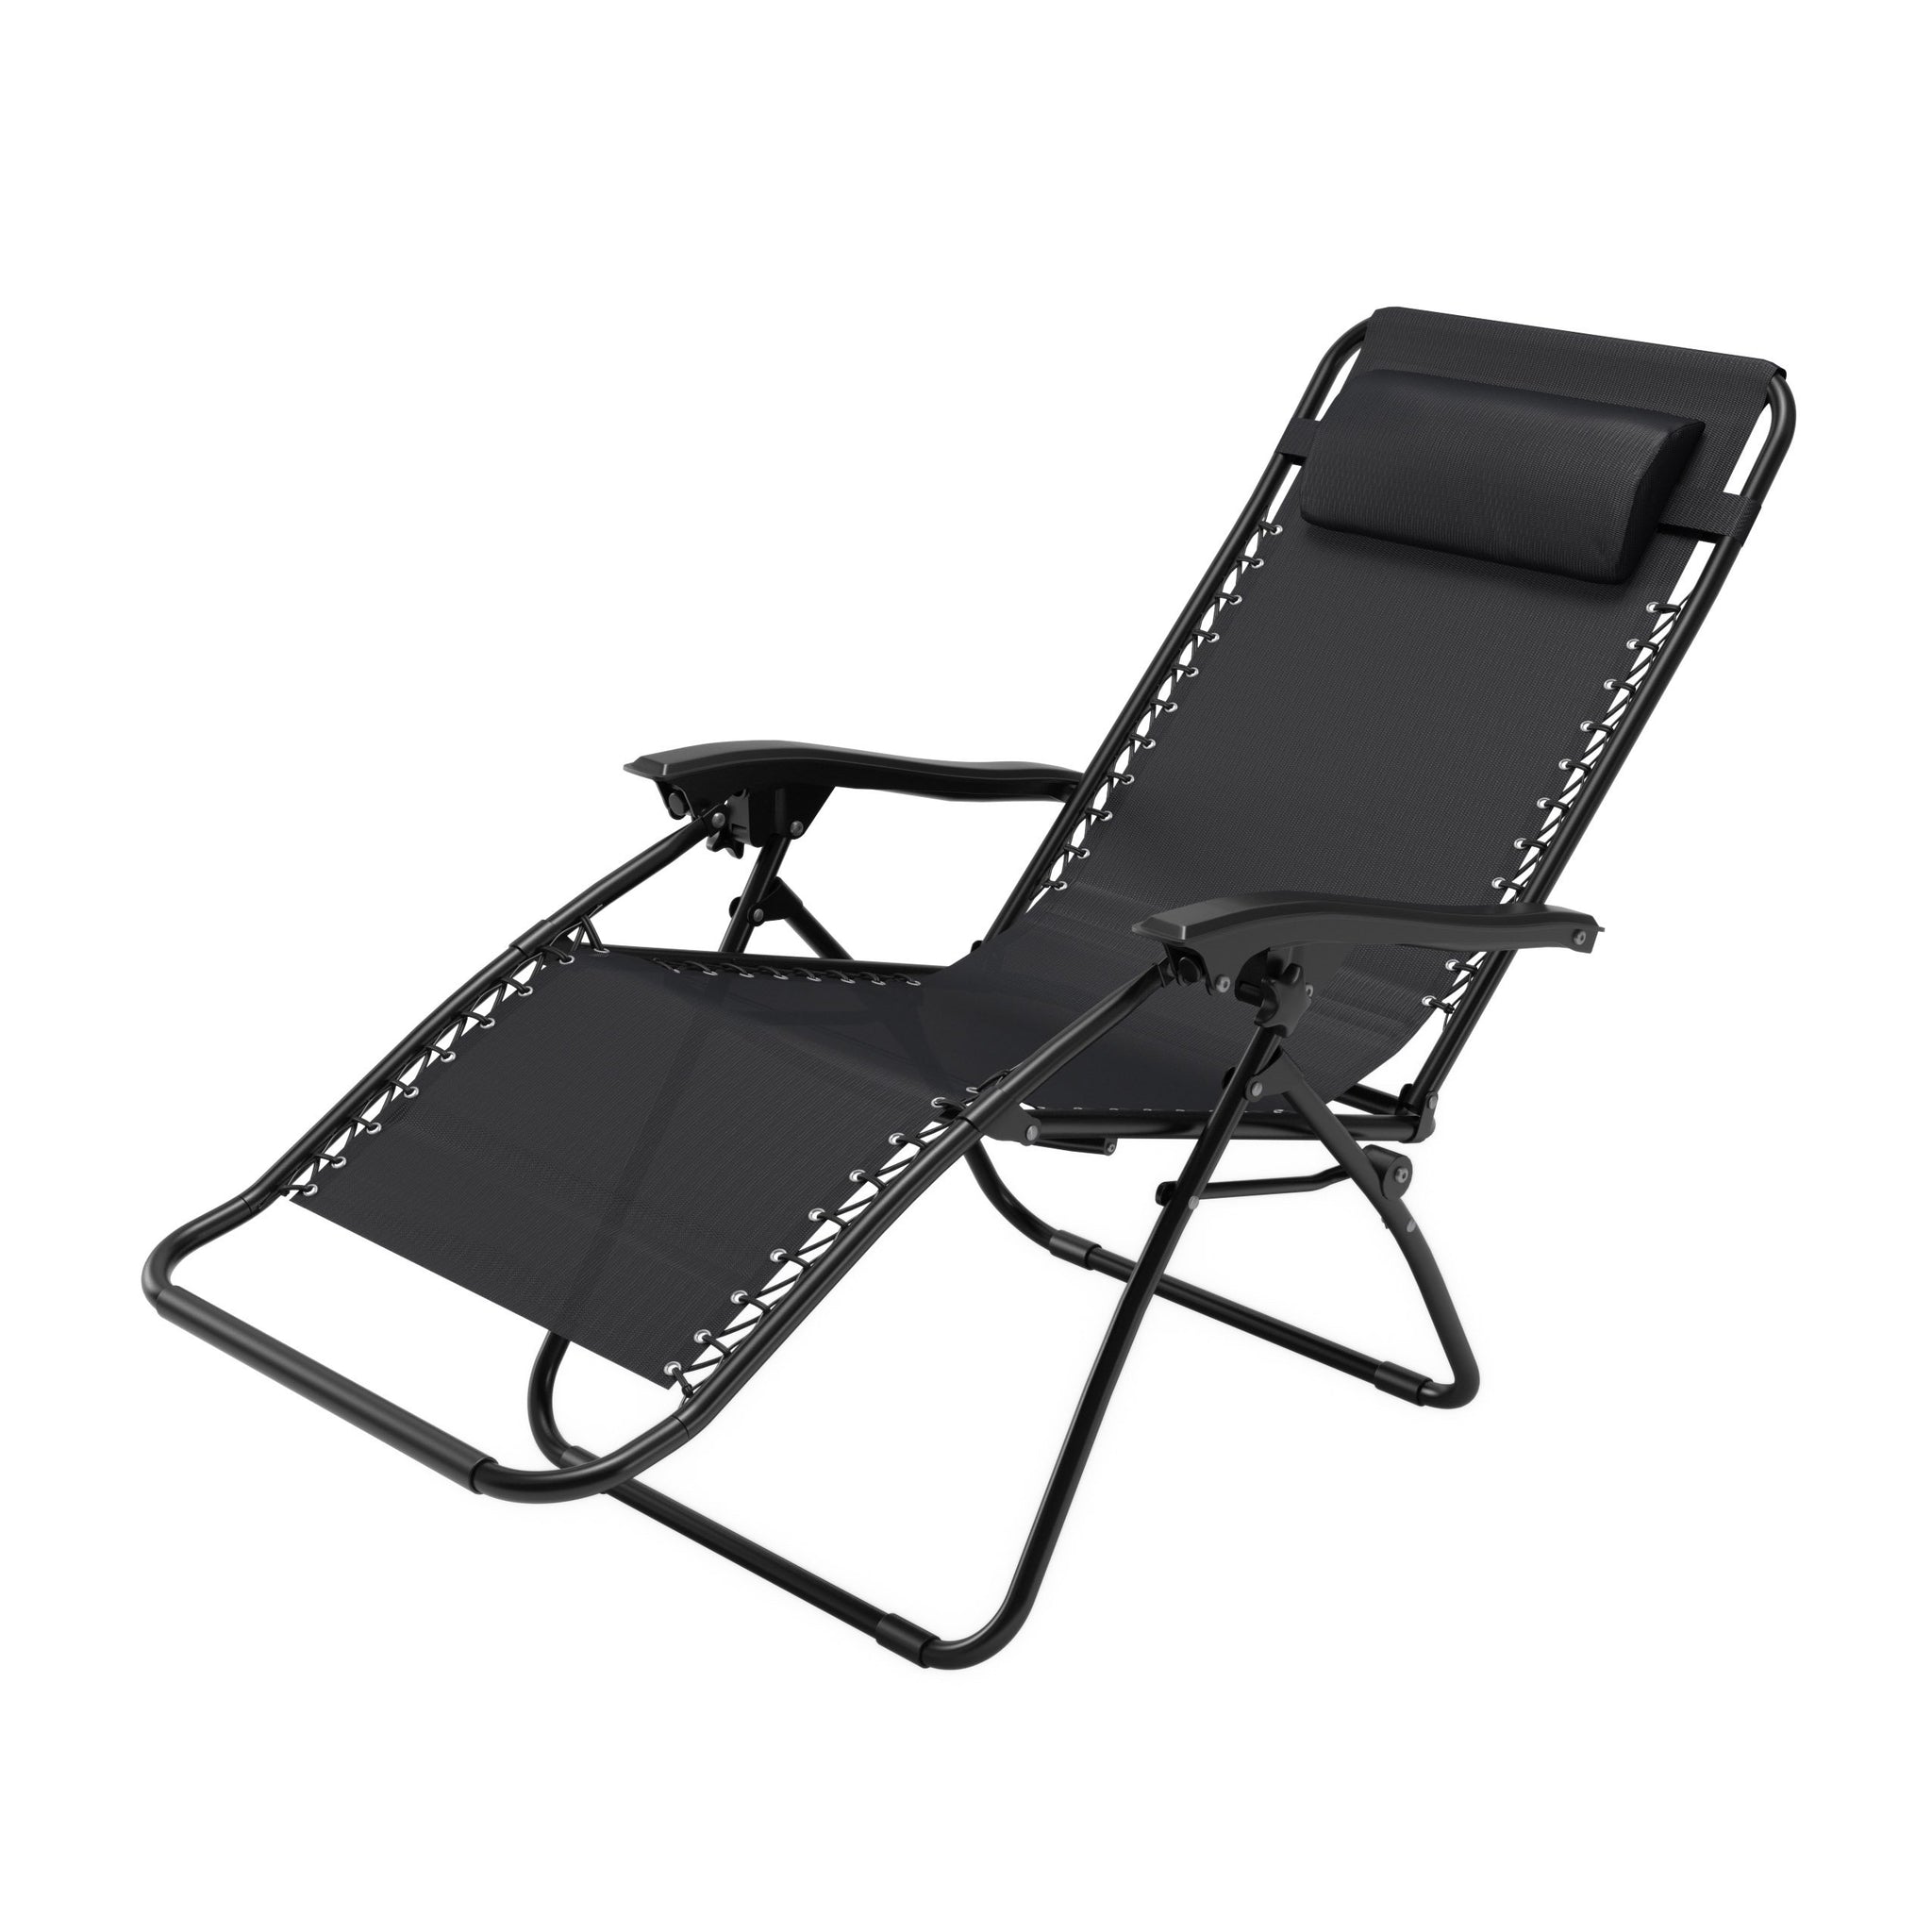 Riverside Textured Zero Gravity Patio Lounger Clearance